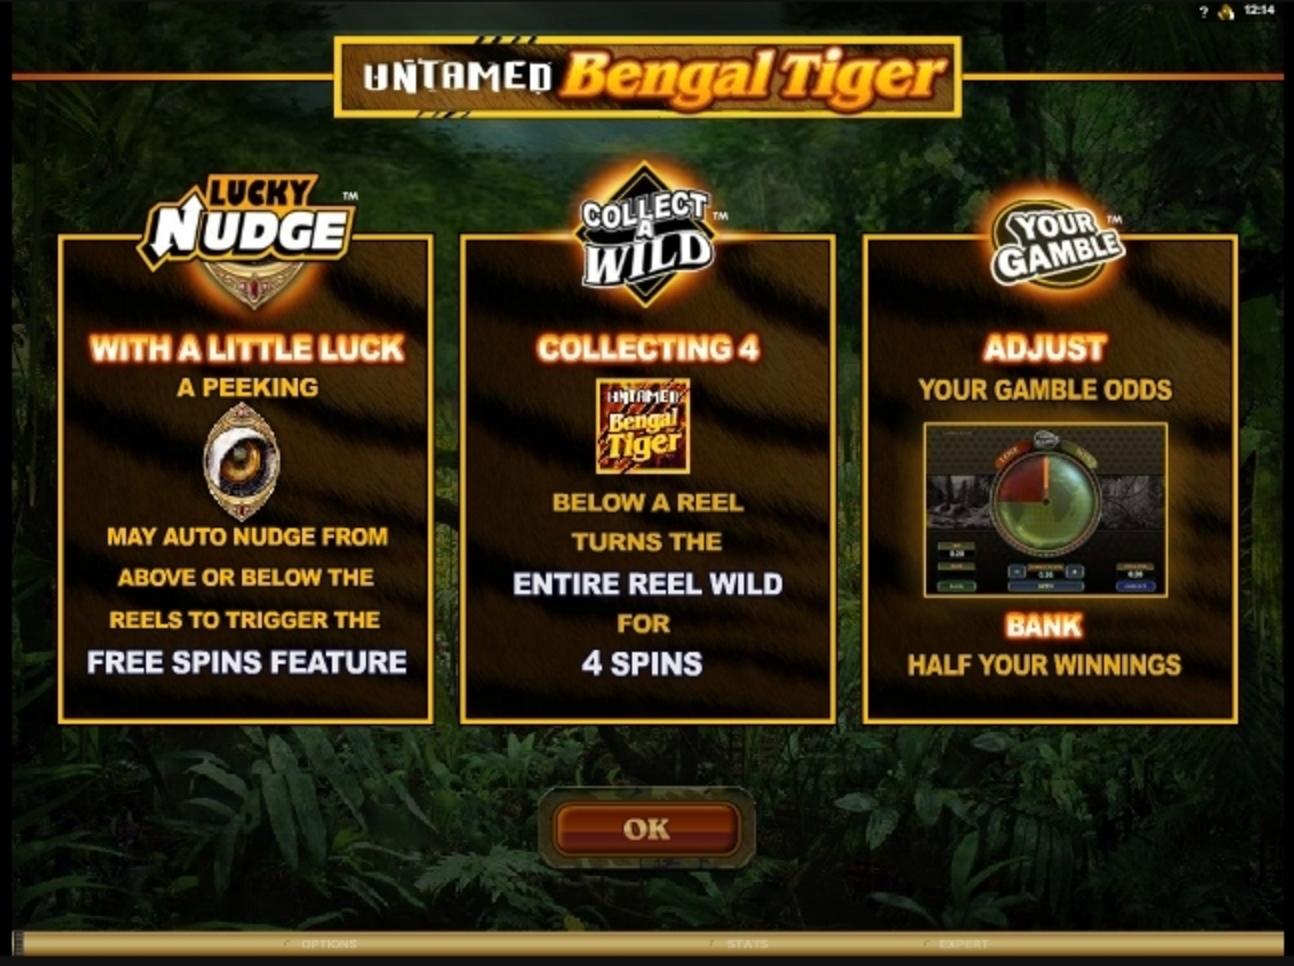 Play Untamed Bengal Tiger Free Casino Slot Game by Microgaming